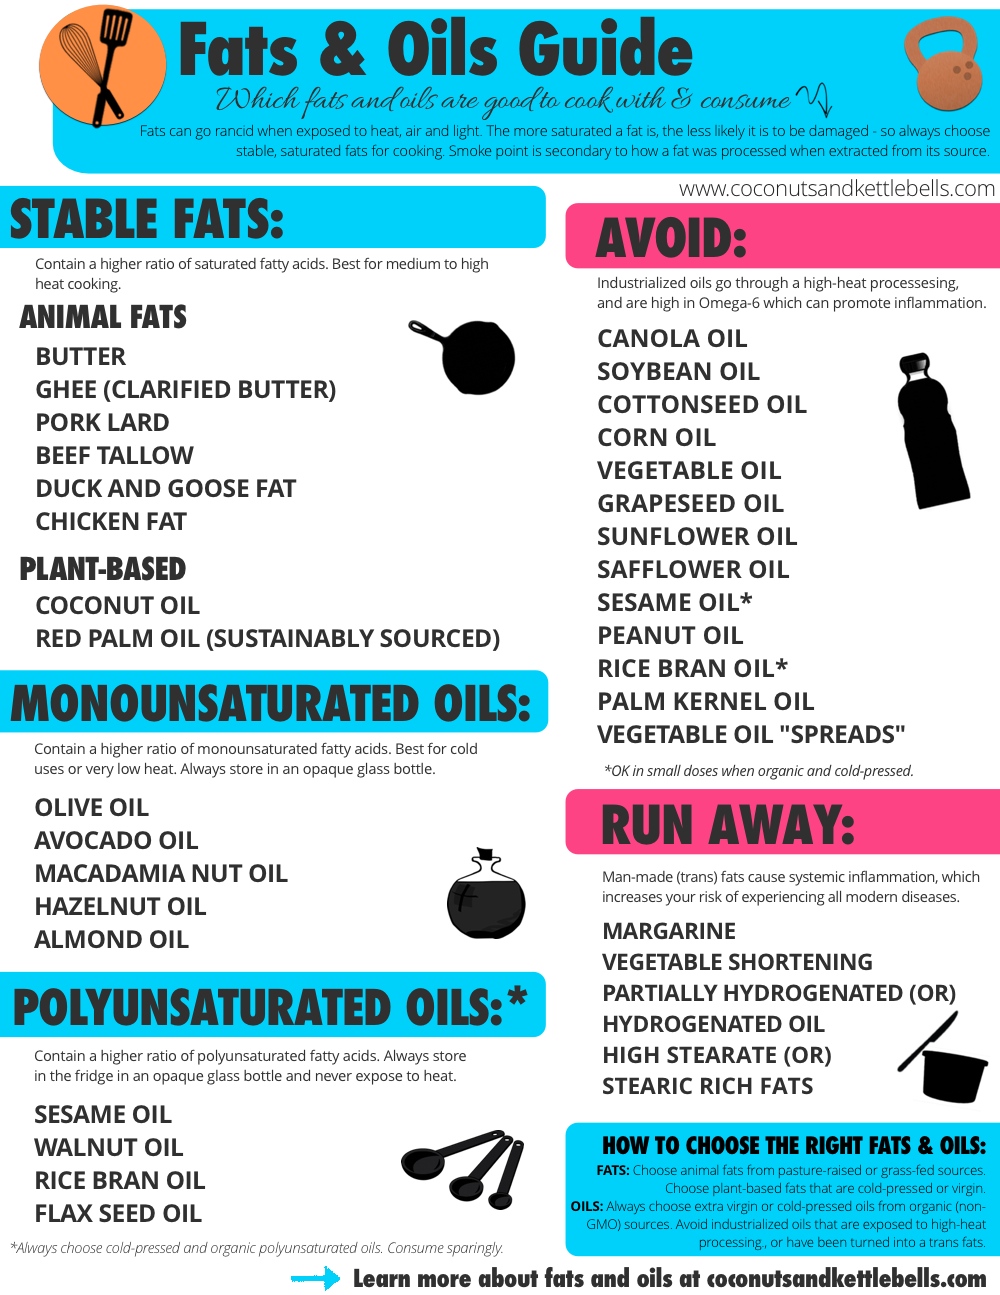 Guide to Fats and Oils